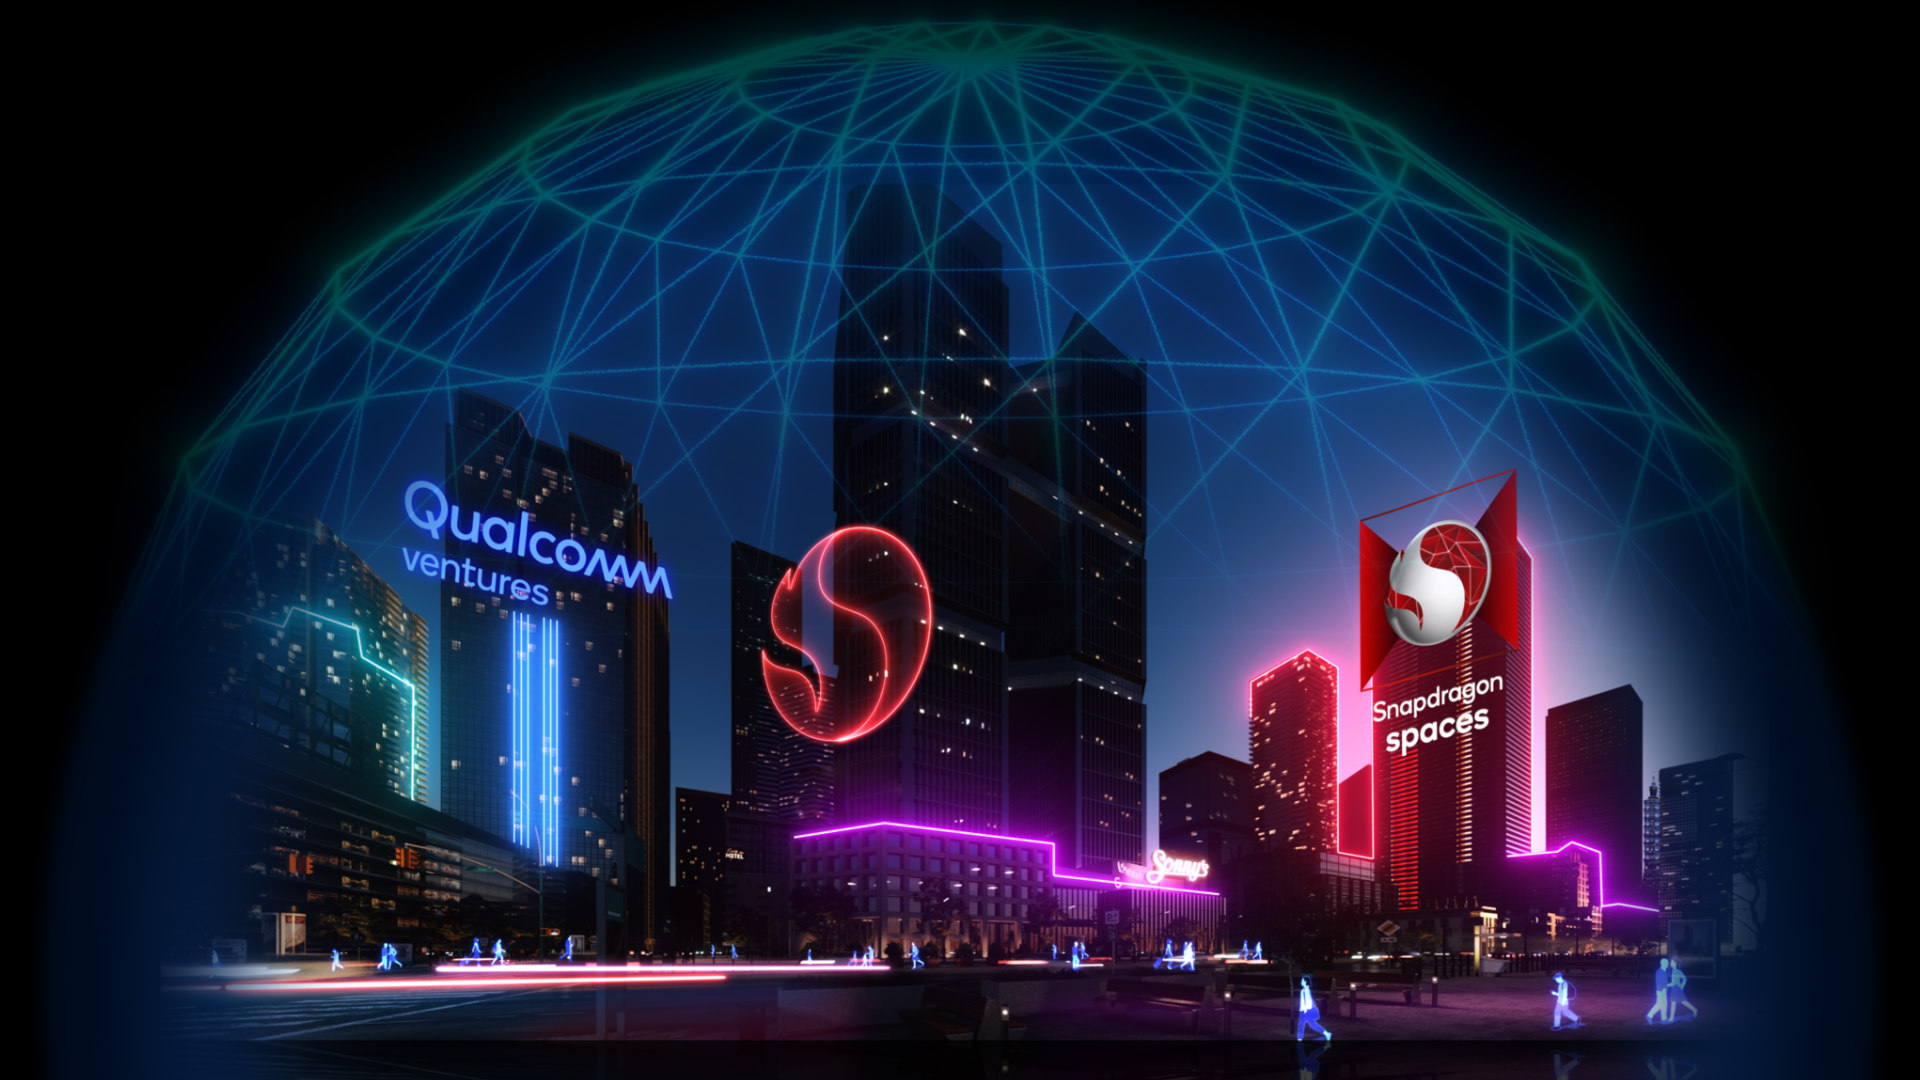 Qualcomm Launches $100M Fund to Help Build the Metaverse